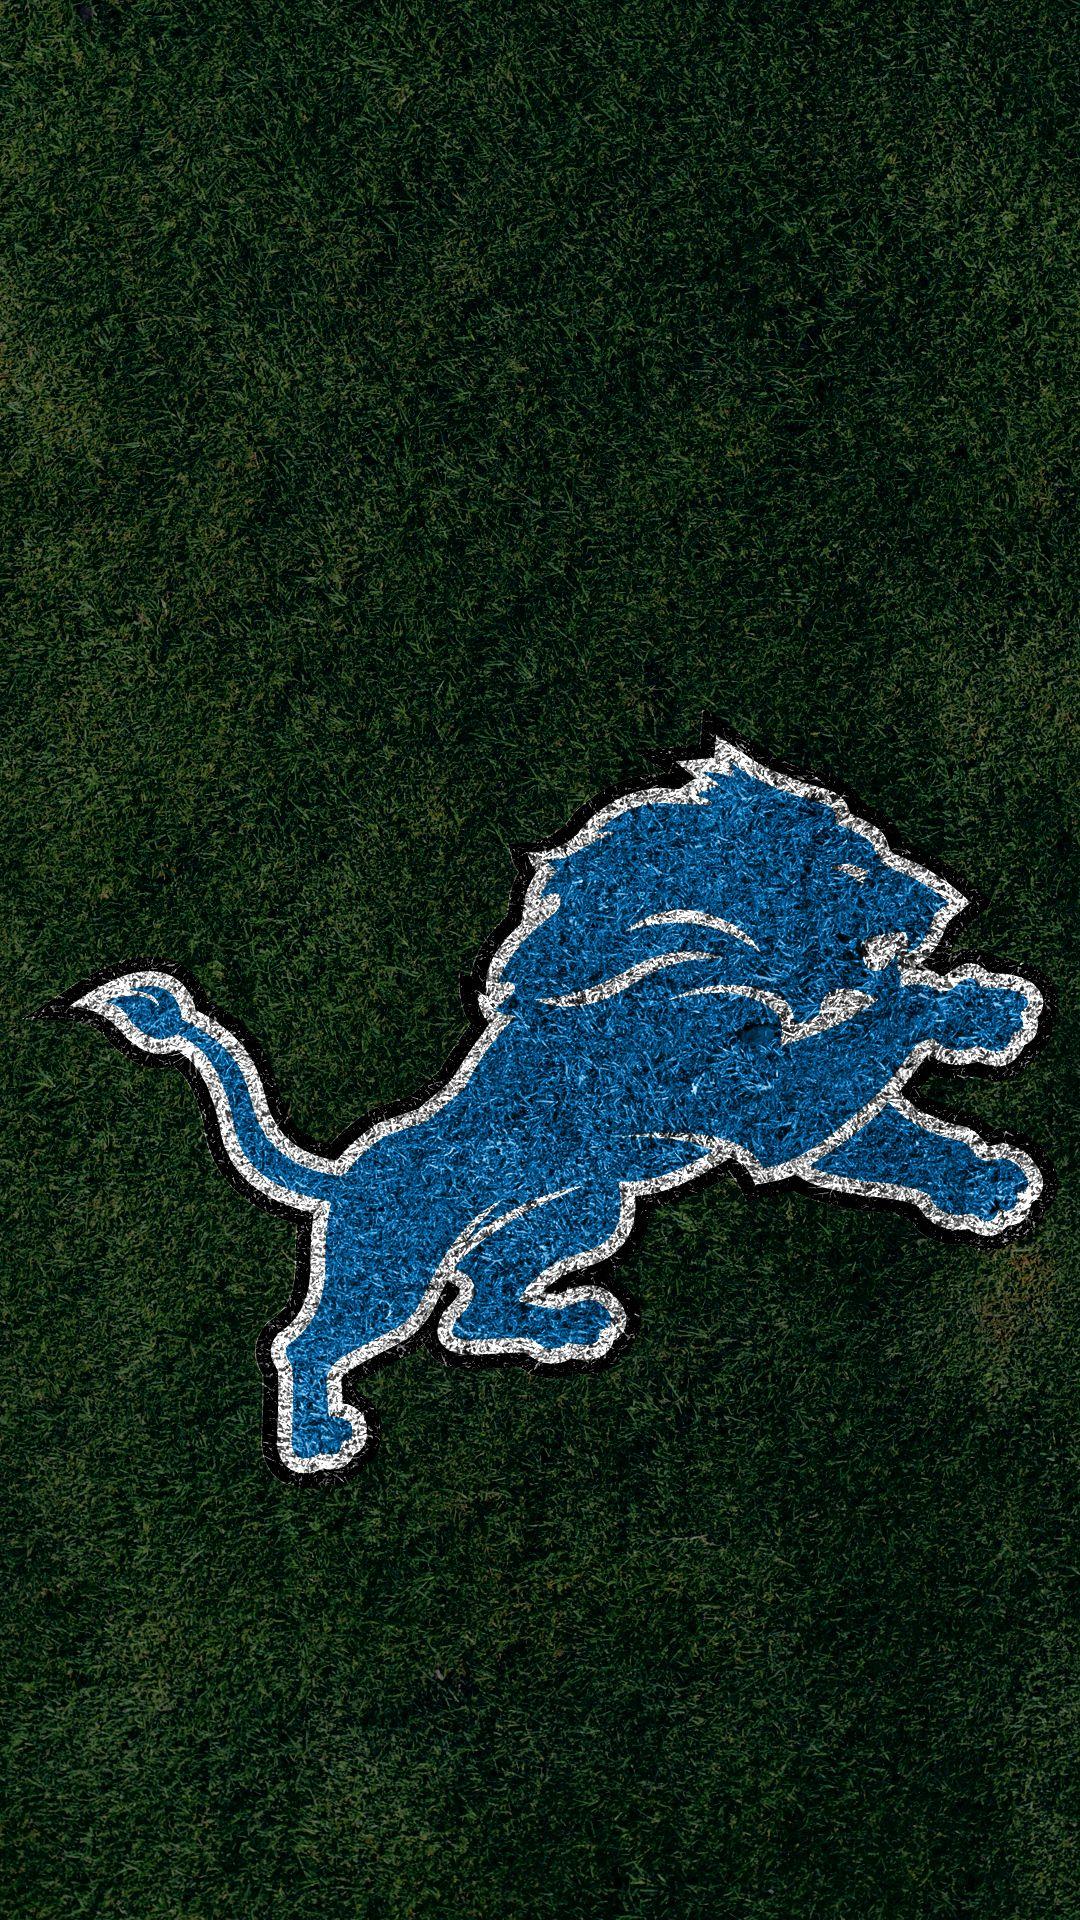 10 Detroit Lions HD Wallpapers and Backgrounds